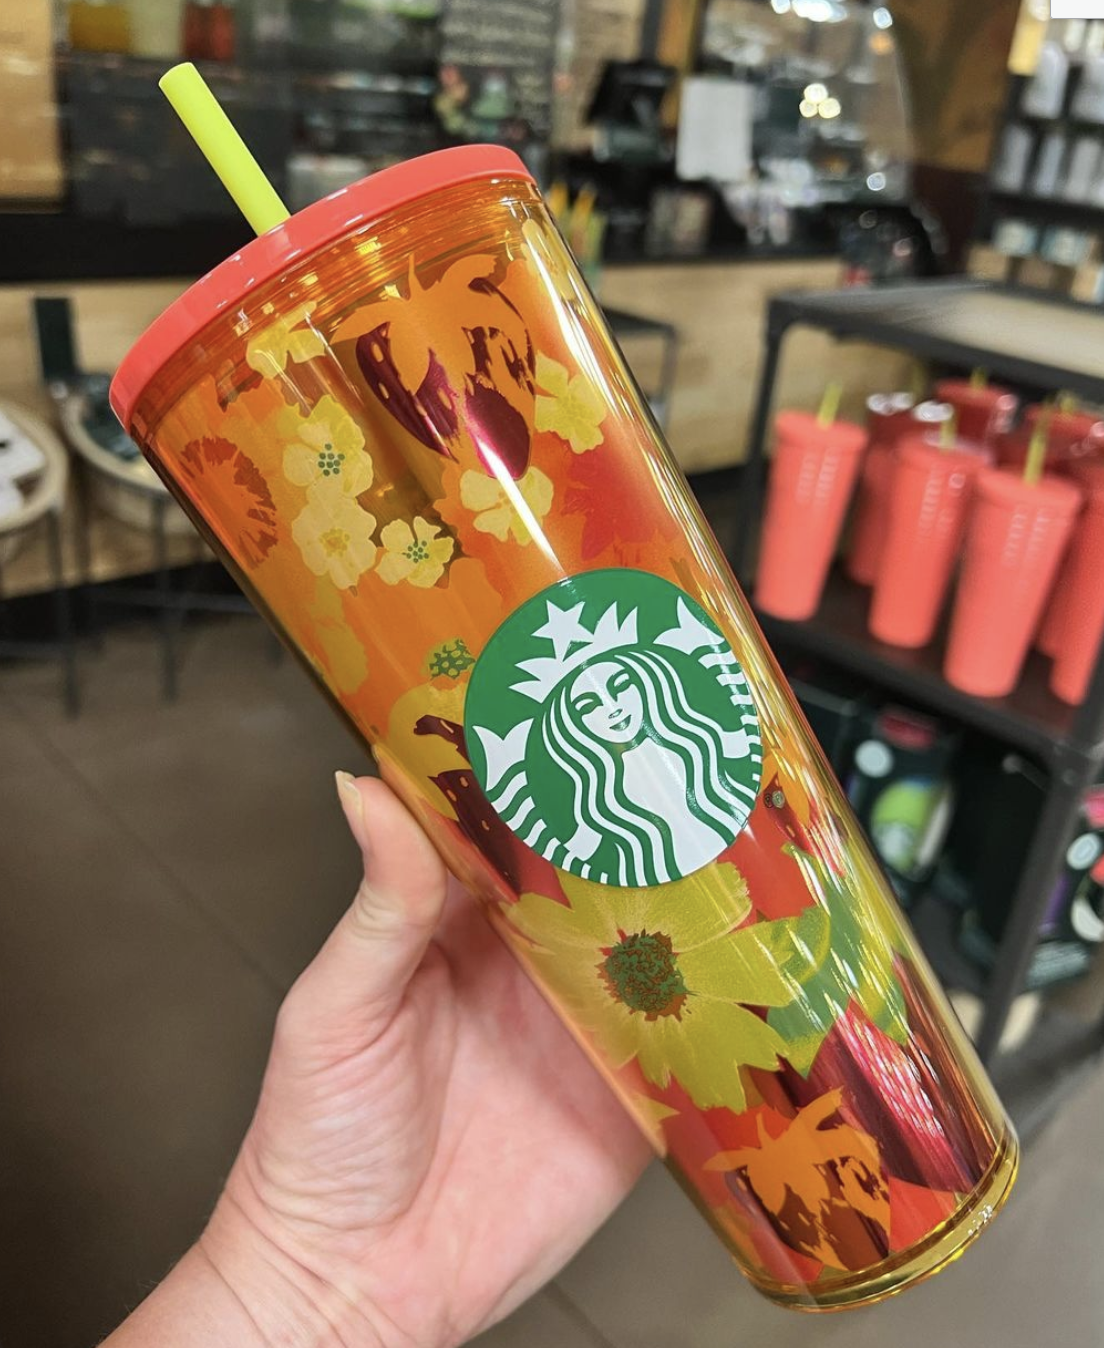 Starbucks Cups and Tumblers for Summer 2022 Are Here - Let's Eat Cake